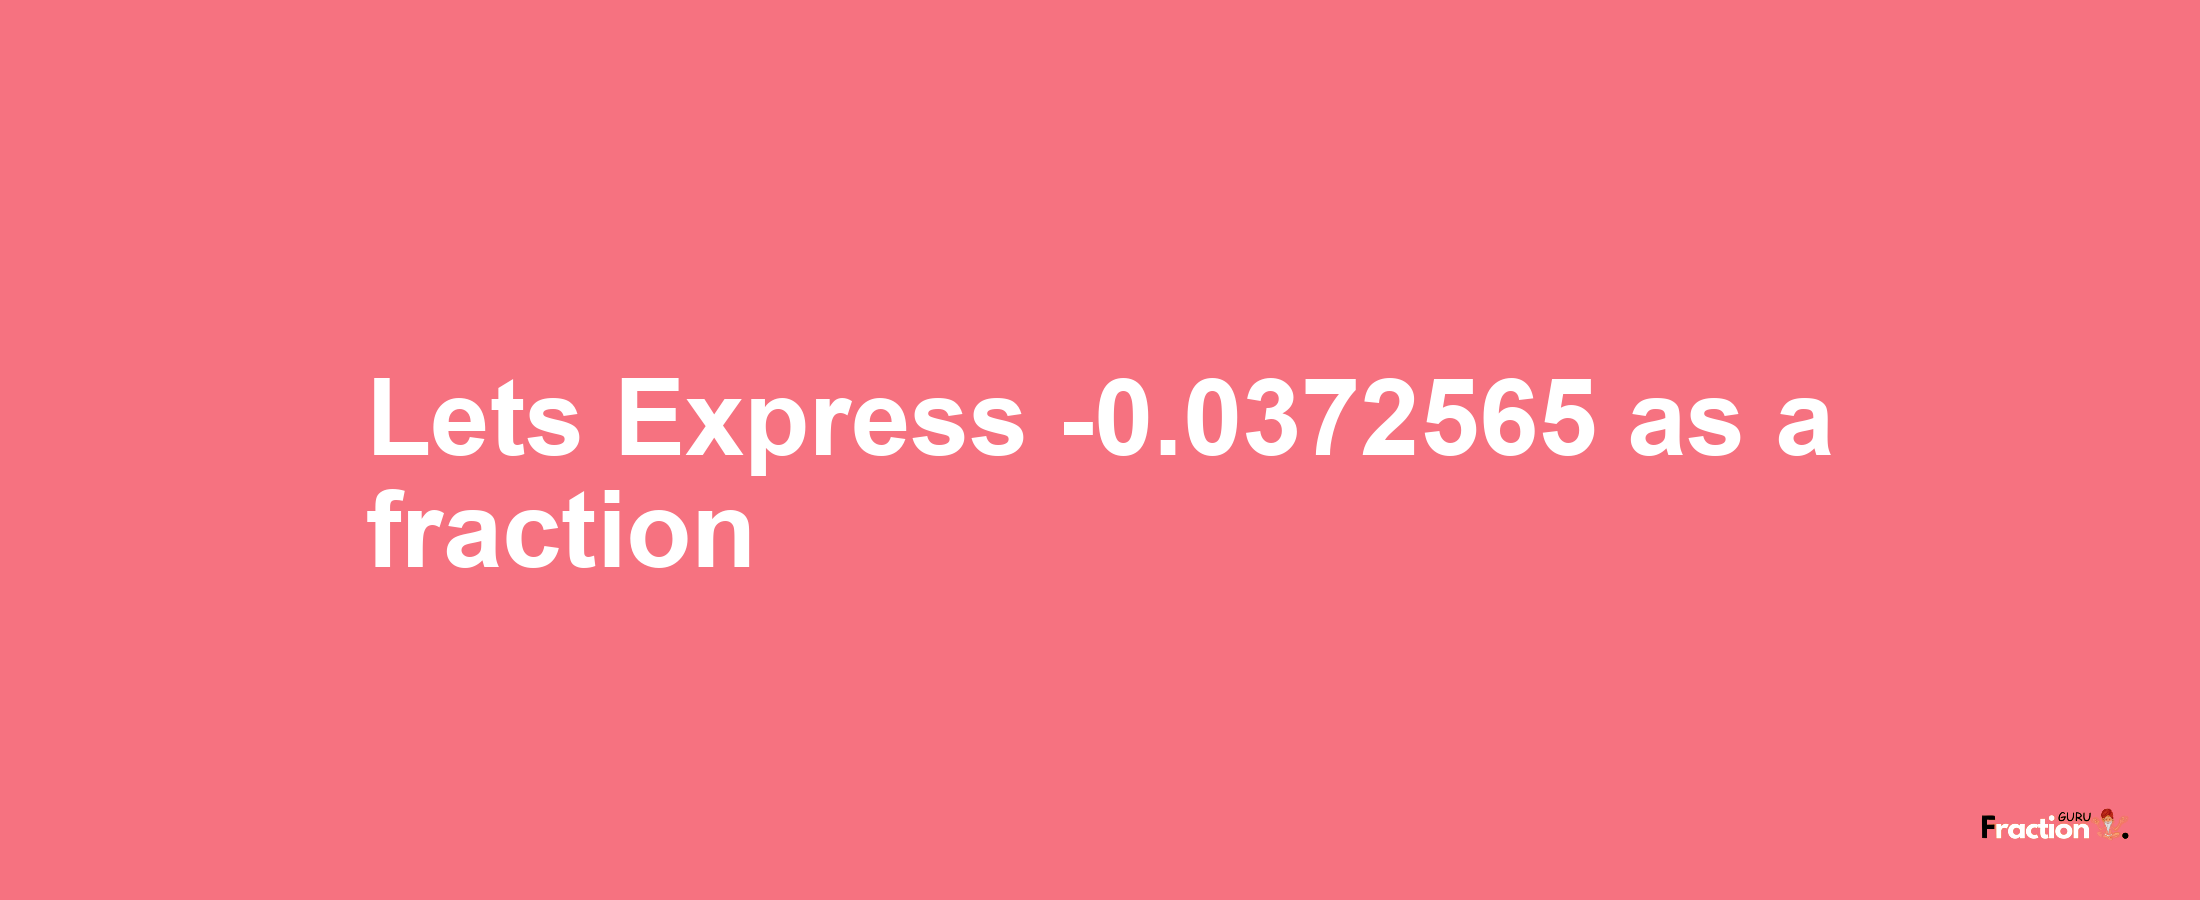 Lets Express -0.0372565 as afraction